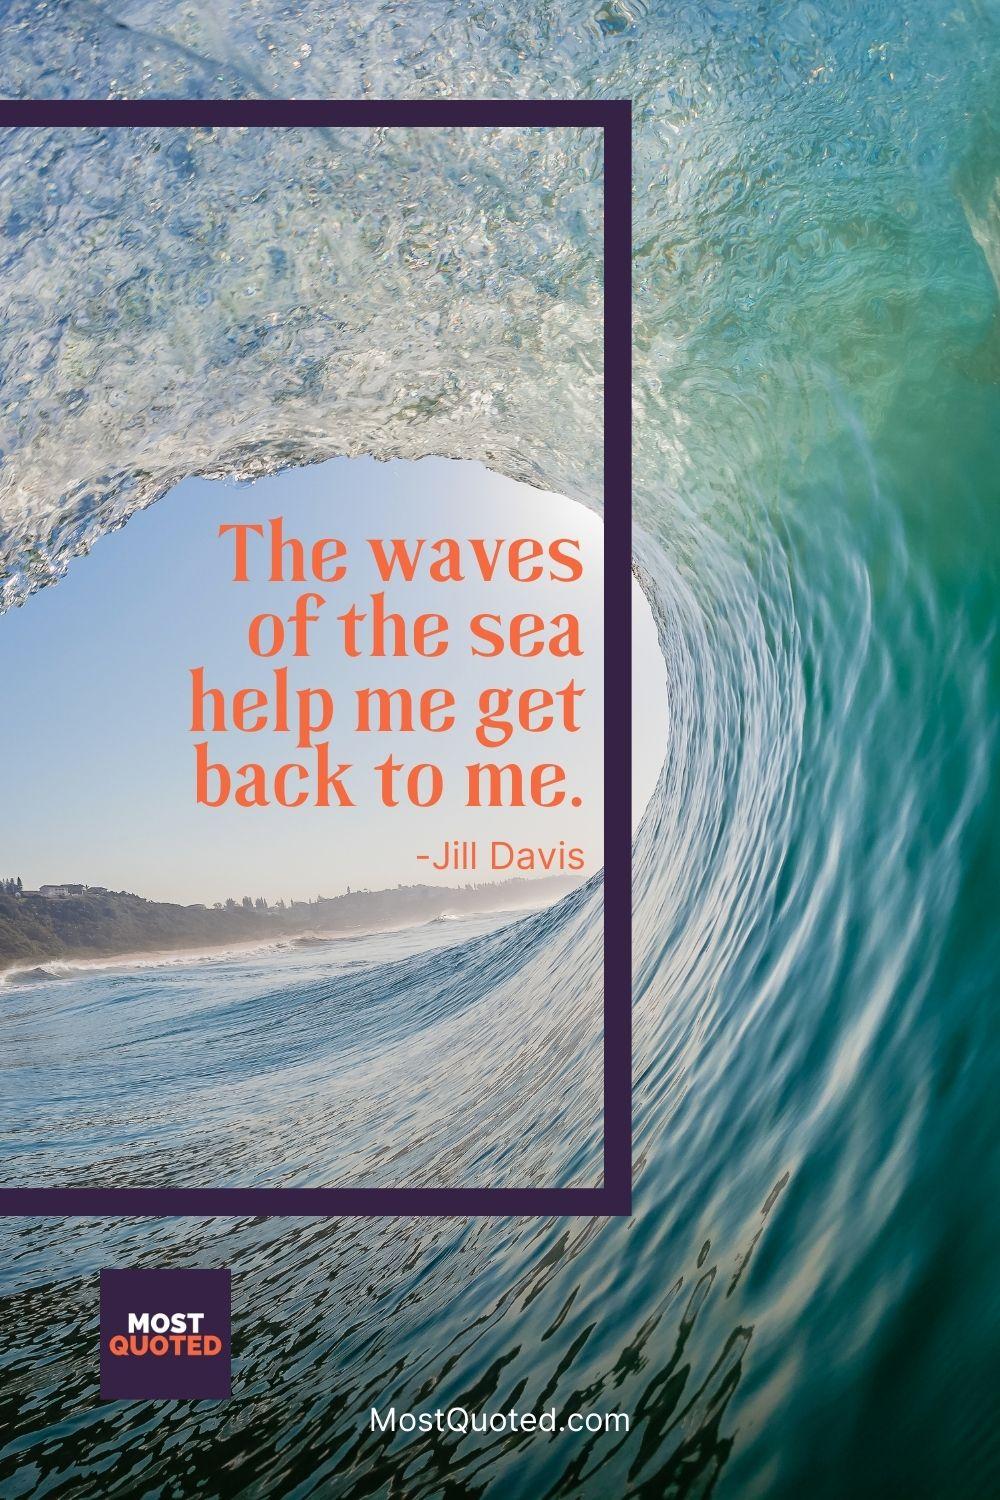 The waves of the sea help me get back to me. - Jill Davis